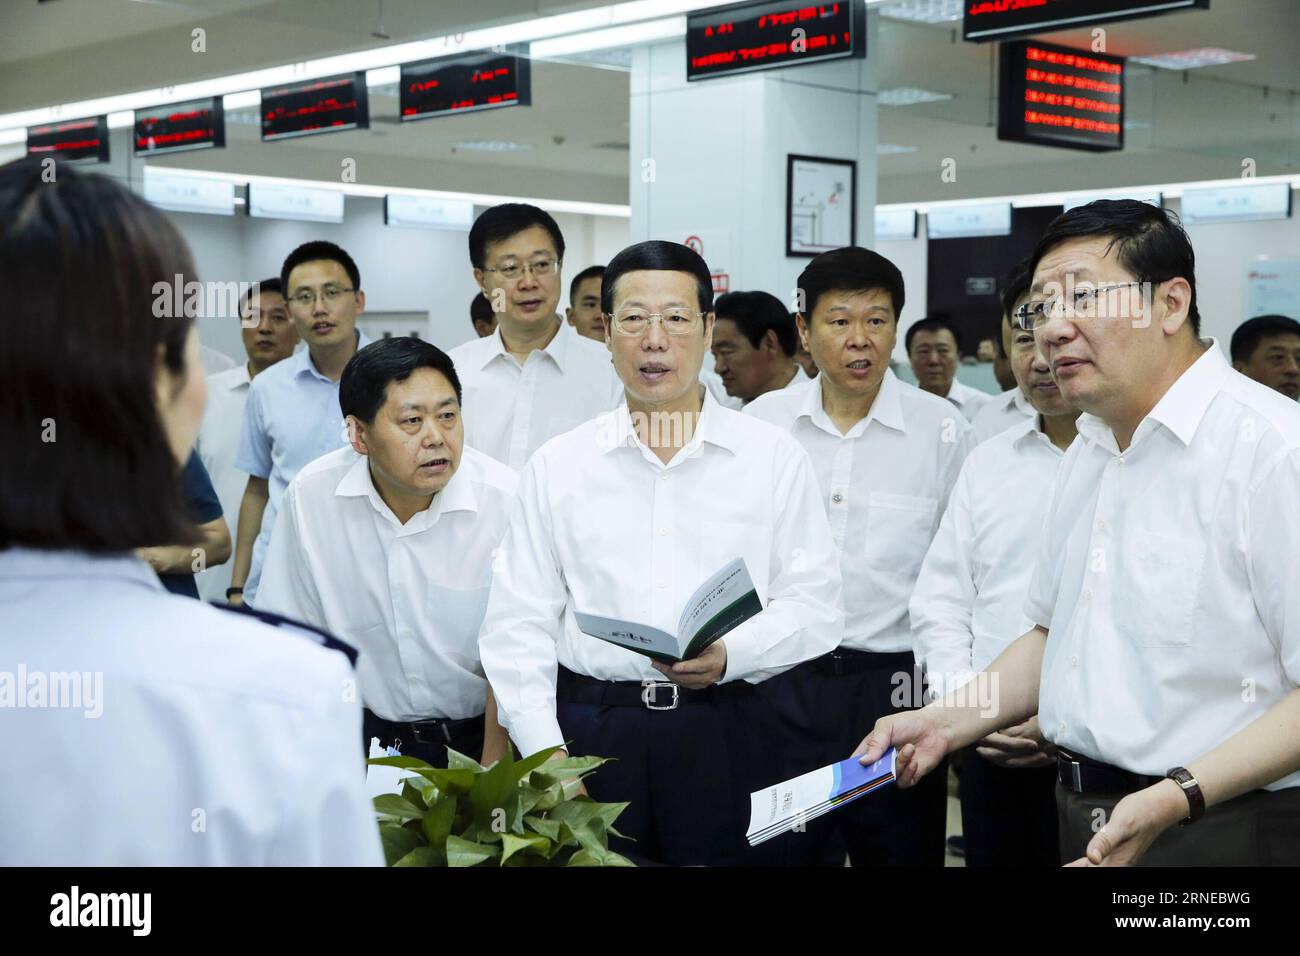 Chinese Vice Premier Zhang Gaoli (C) talks with staff members at the Administrative Service Center of Heping District in Shenyang, capital of northeast China s Liaoning Province, June 16, 2016. During a visit to Liaoning Province from June 16 to 17, Zhang urged local governments in China s northeastern region to revitalize the old industrial base. ) (zhs) CHINA-ZHANG GAOLI-LIAONING-REVITALIZATION (CN) JuxPeng PUBLICATIONxNOTxINxCHN   Chinese Vice Premier Zhang Gaoli C Talks With Staff Members AT The Administrative Service Center of Heping District in Shenyang Capital of Northeast China S Liaon Stock Photo